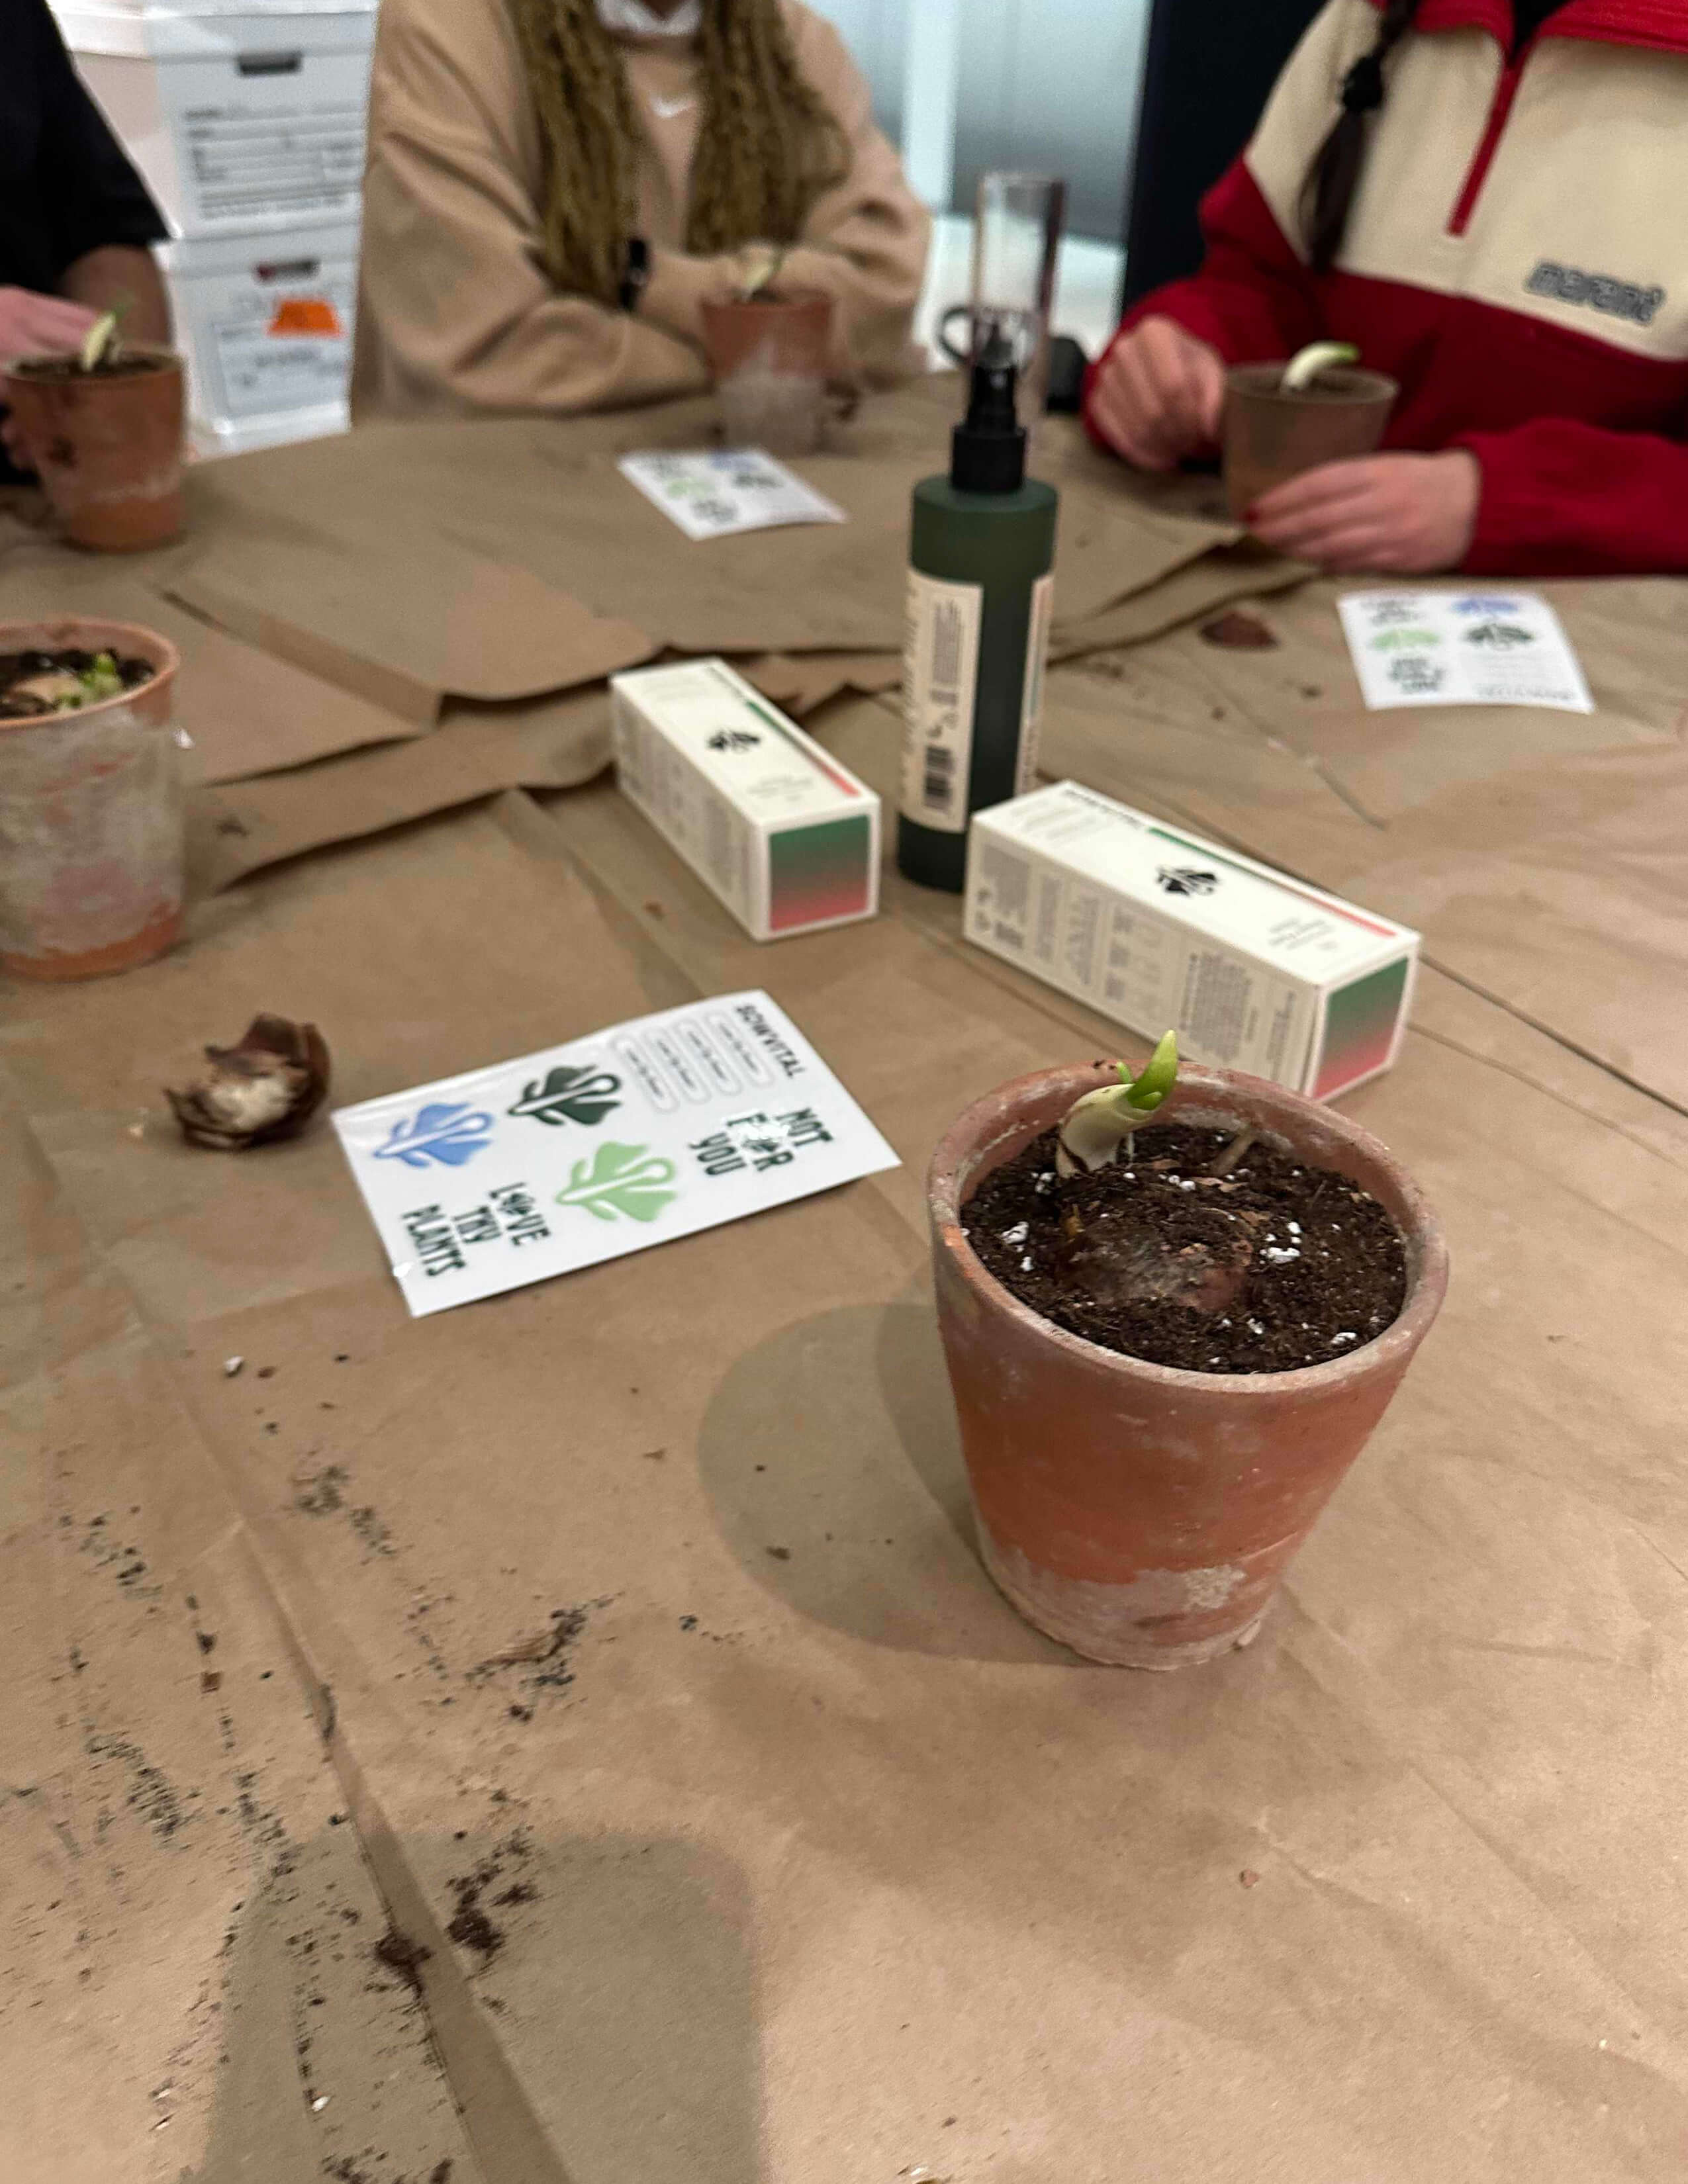 Plenty of plants are grown in terracotta pots, while there are Sowvital’s house plant products and stickers around on the table.